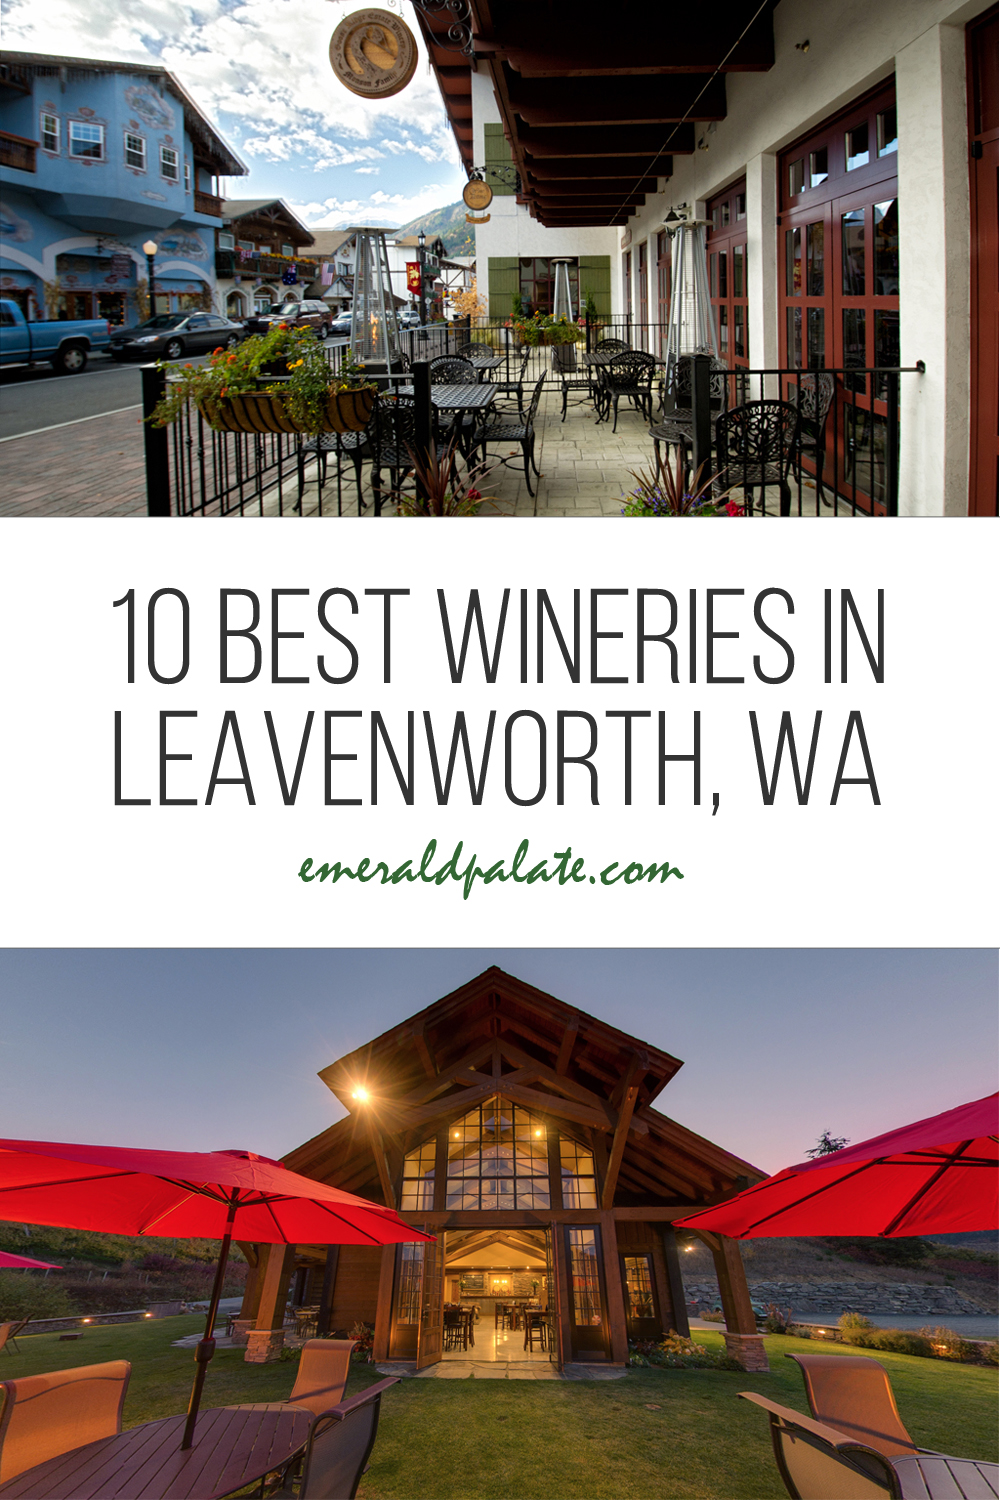 The best Leavenworth wineries and tasting rooms, including a map so you can go to the best tasting rooms in Leavenworth, WA.